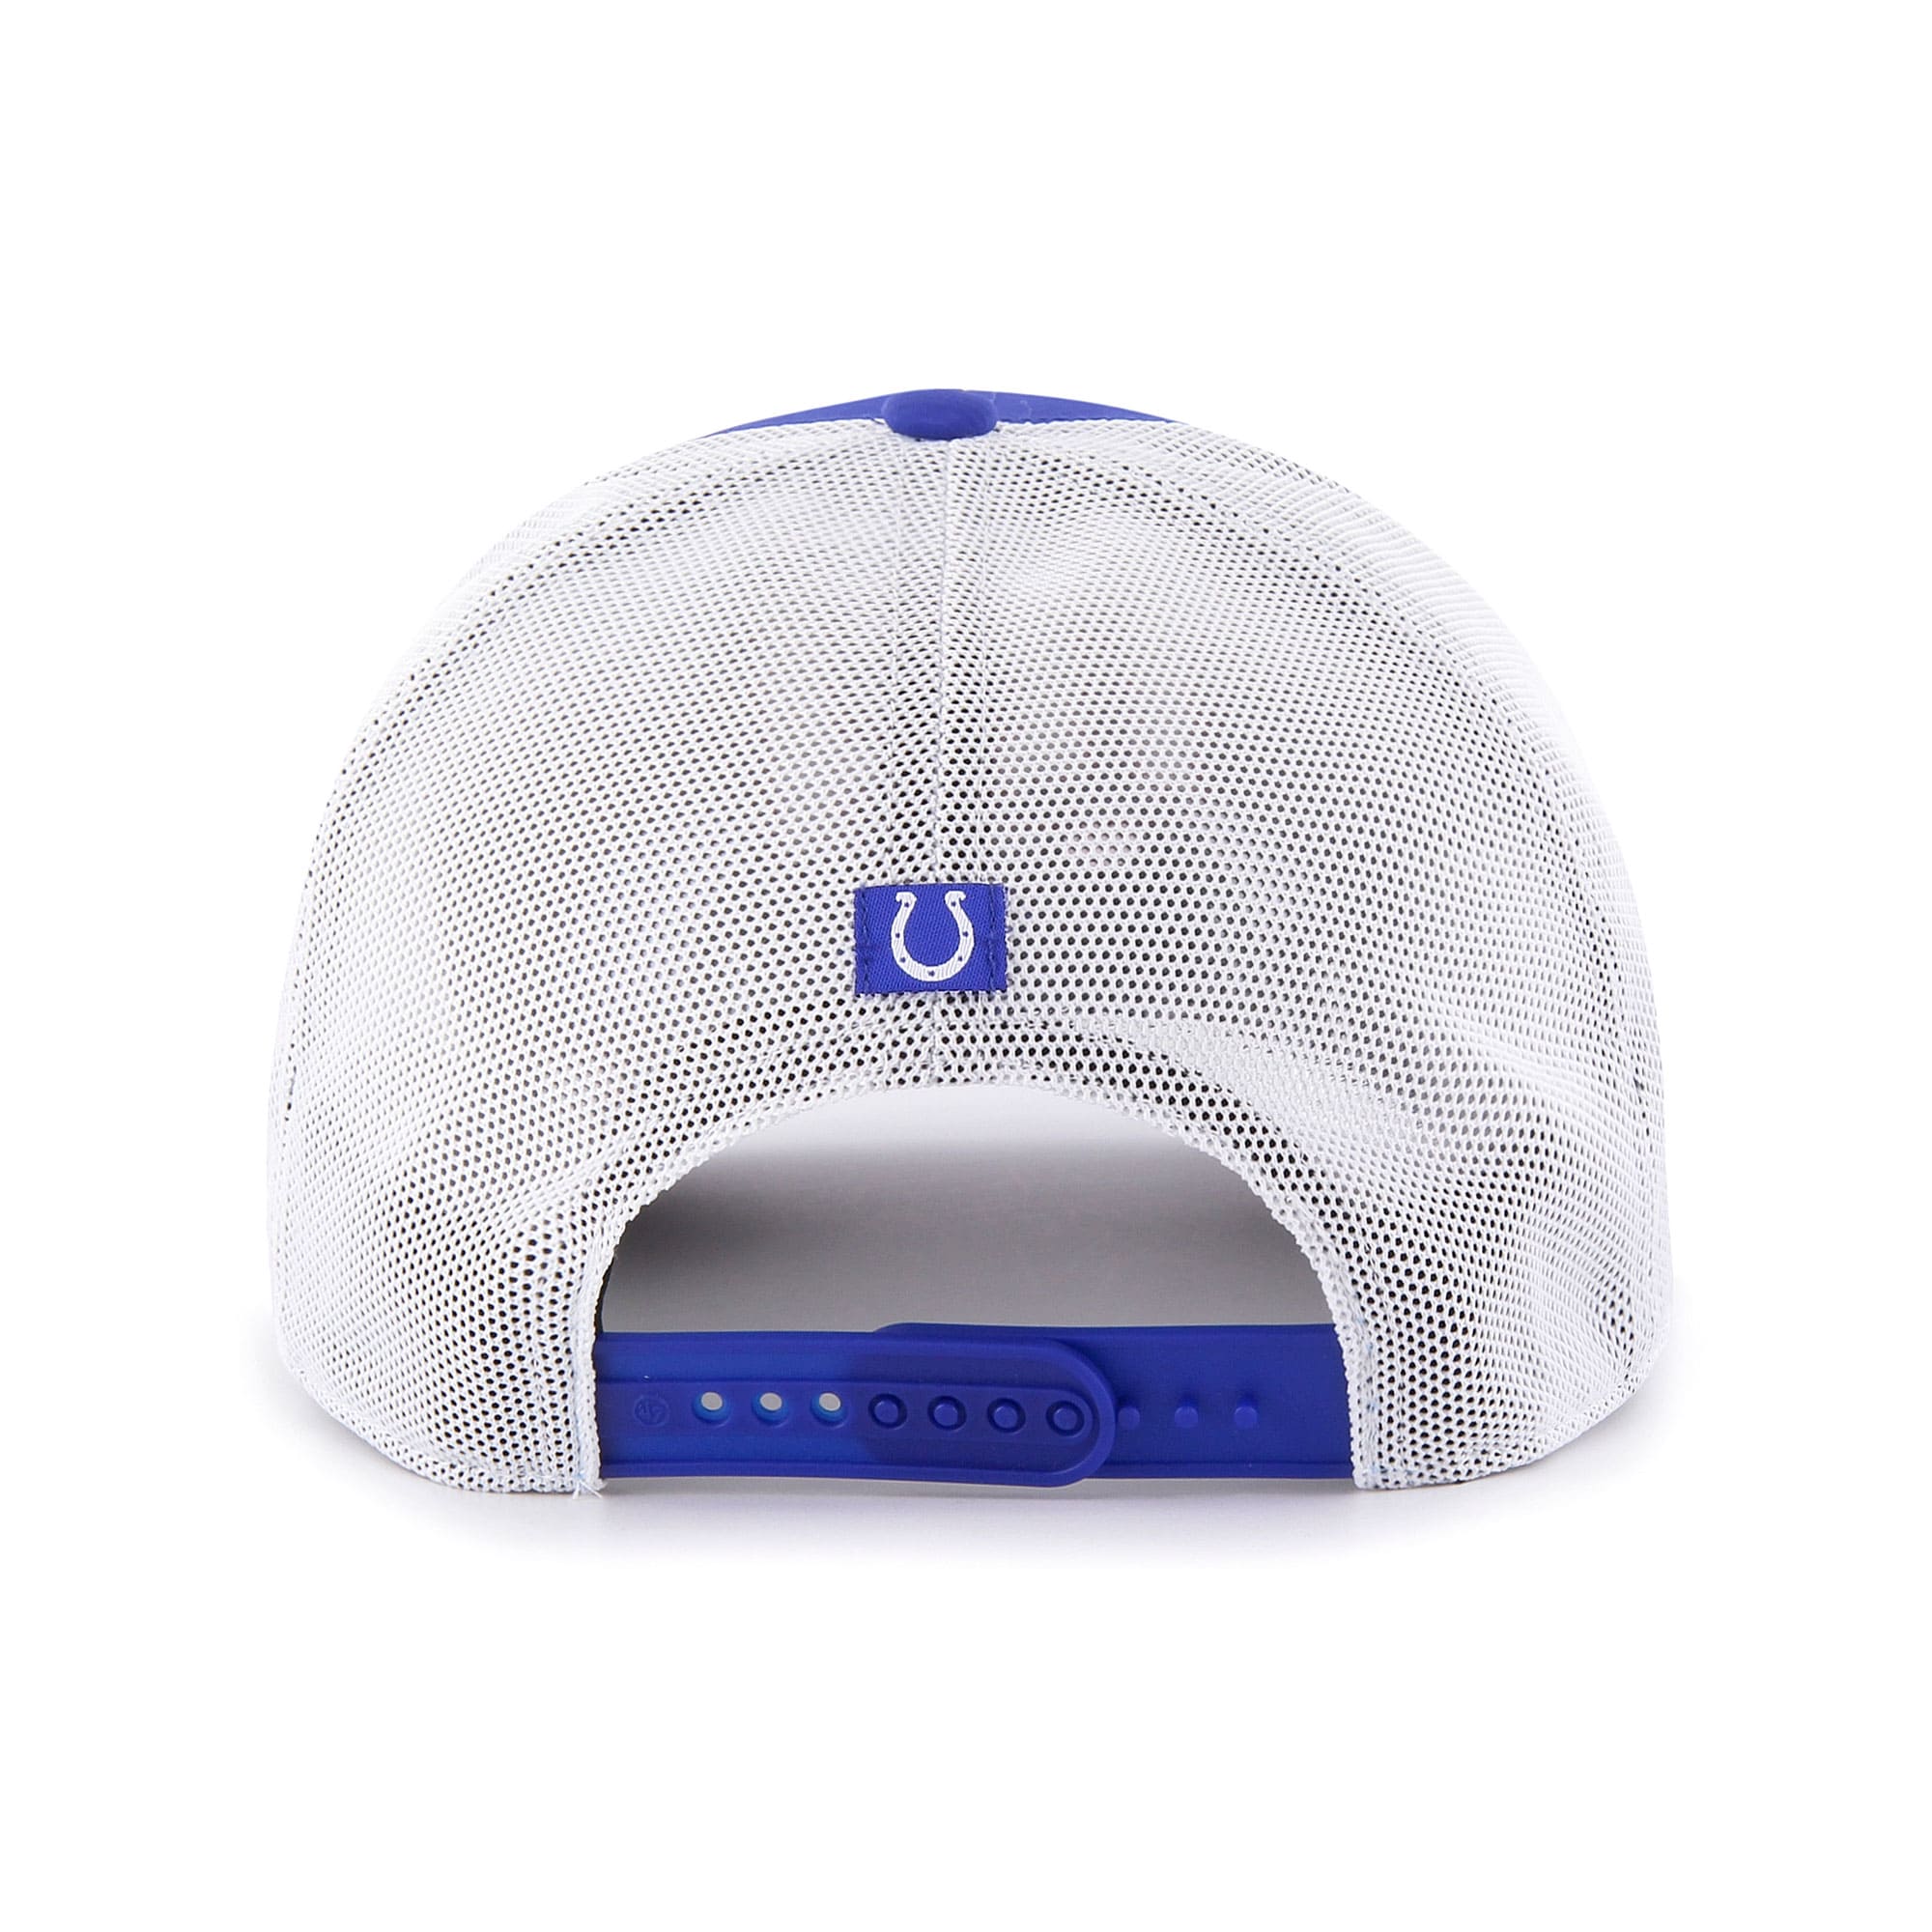 indianapolis colts trucker hat